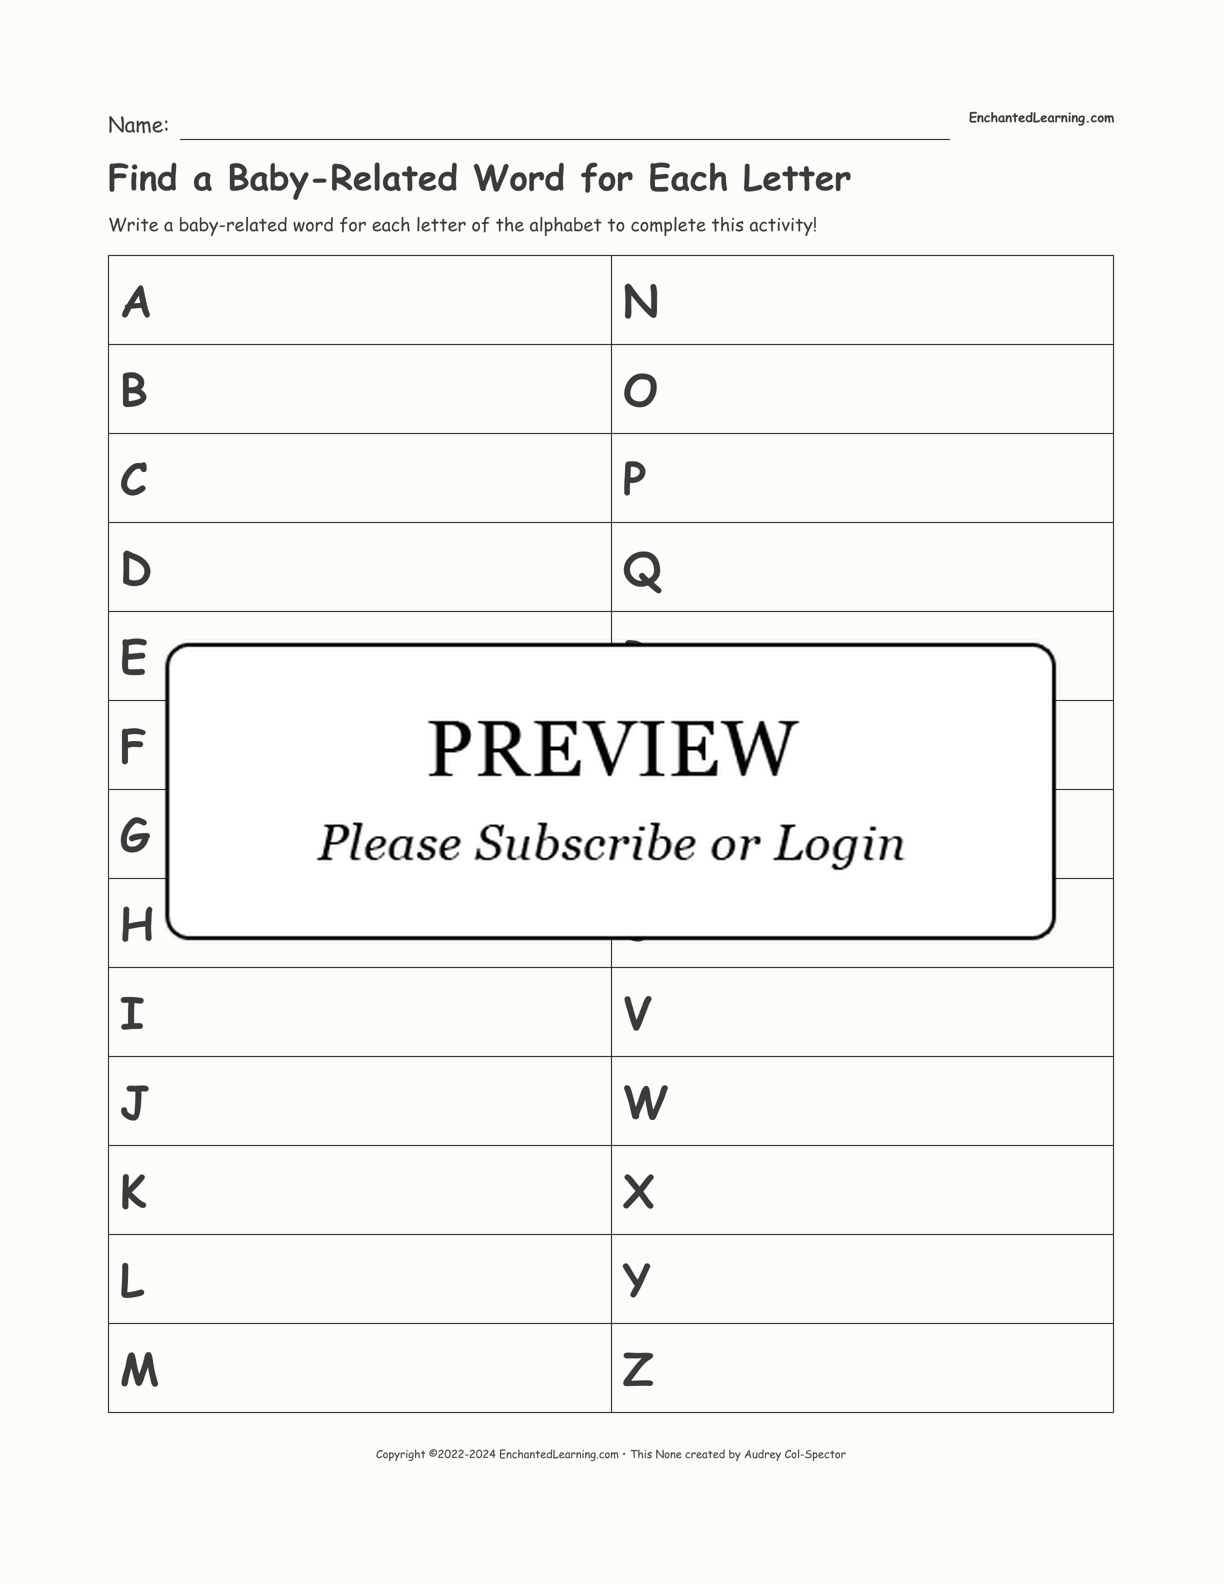 Find a Baby-Related Word for Each Letter interactive worksheet page 1